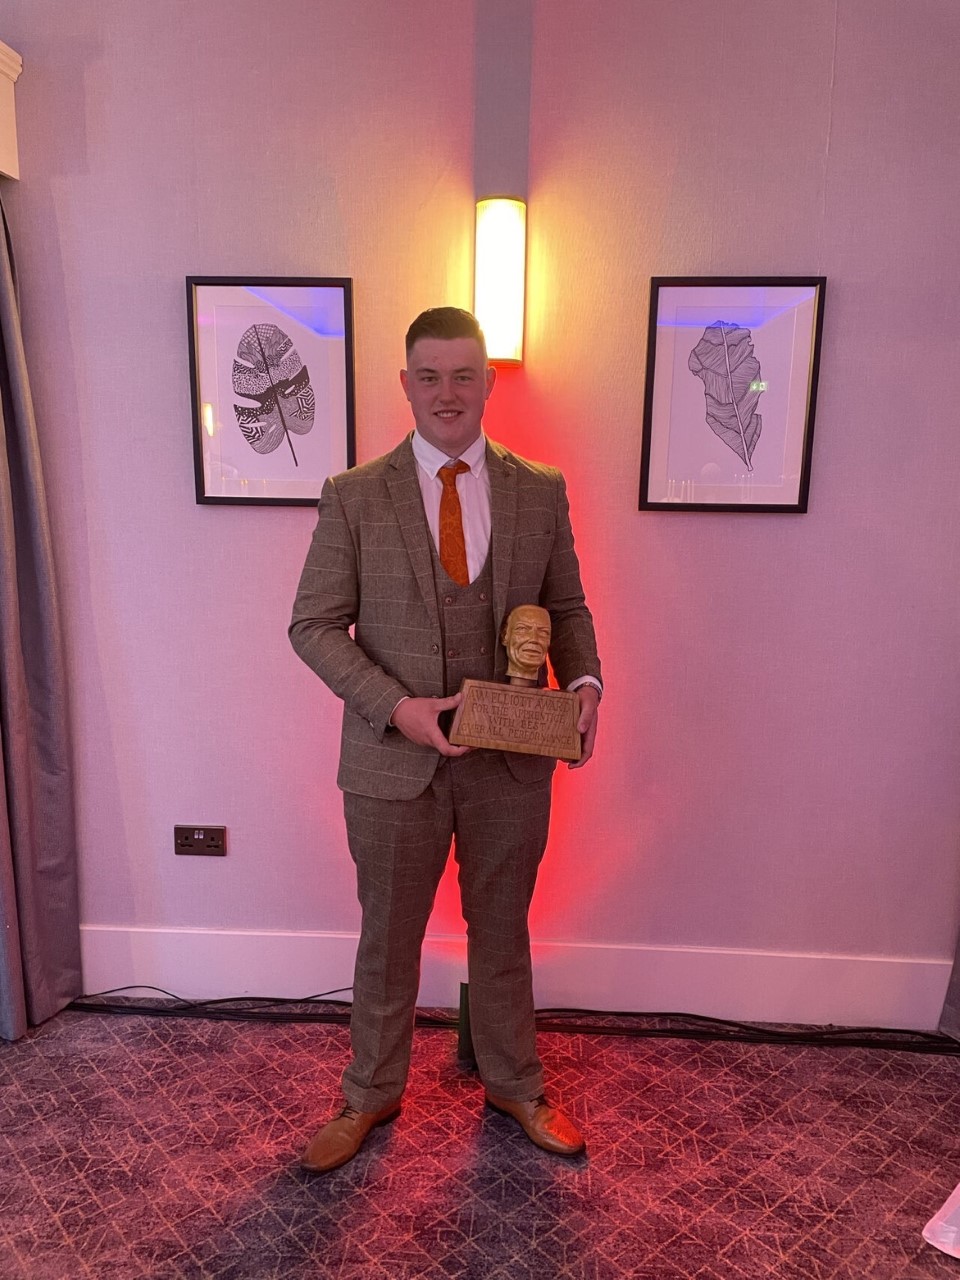 PTSG engineer is Apprentice of the Year